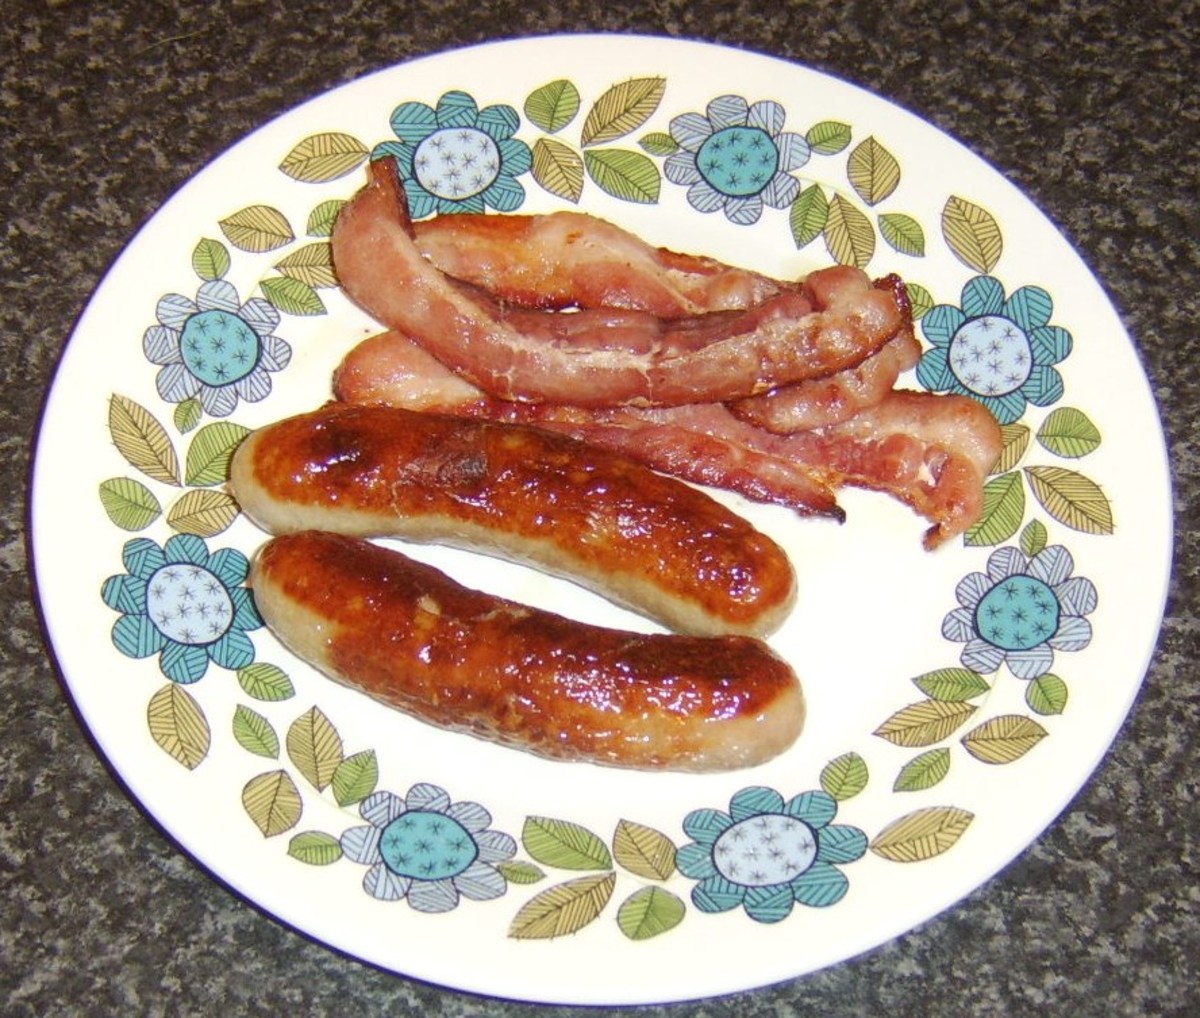 Cooked sausage and bacon